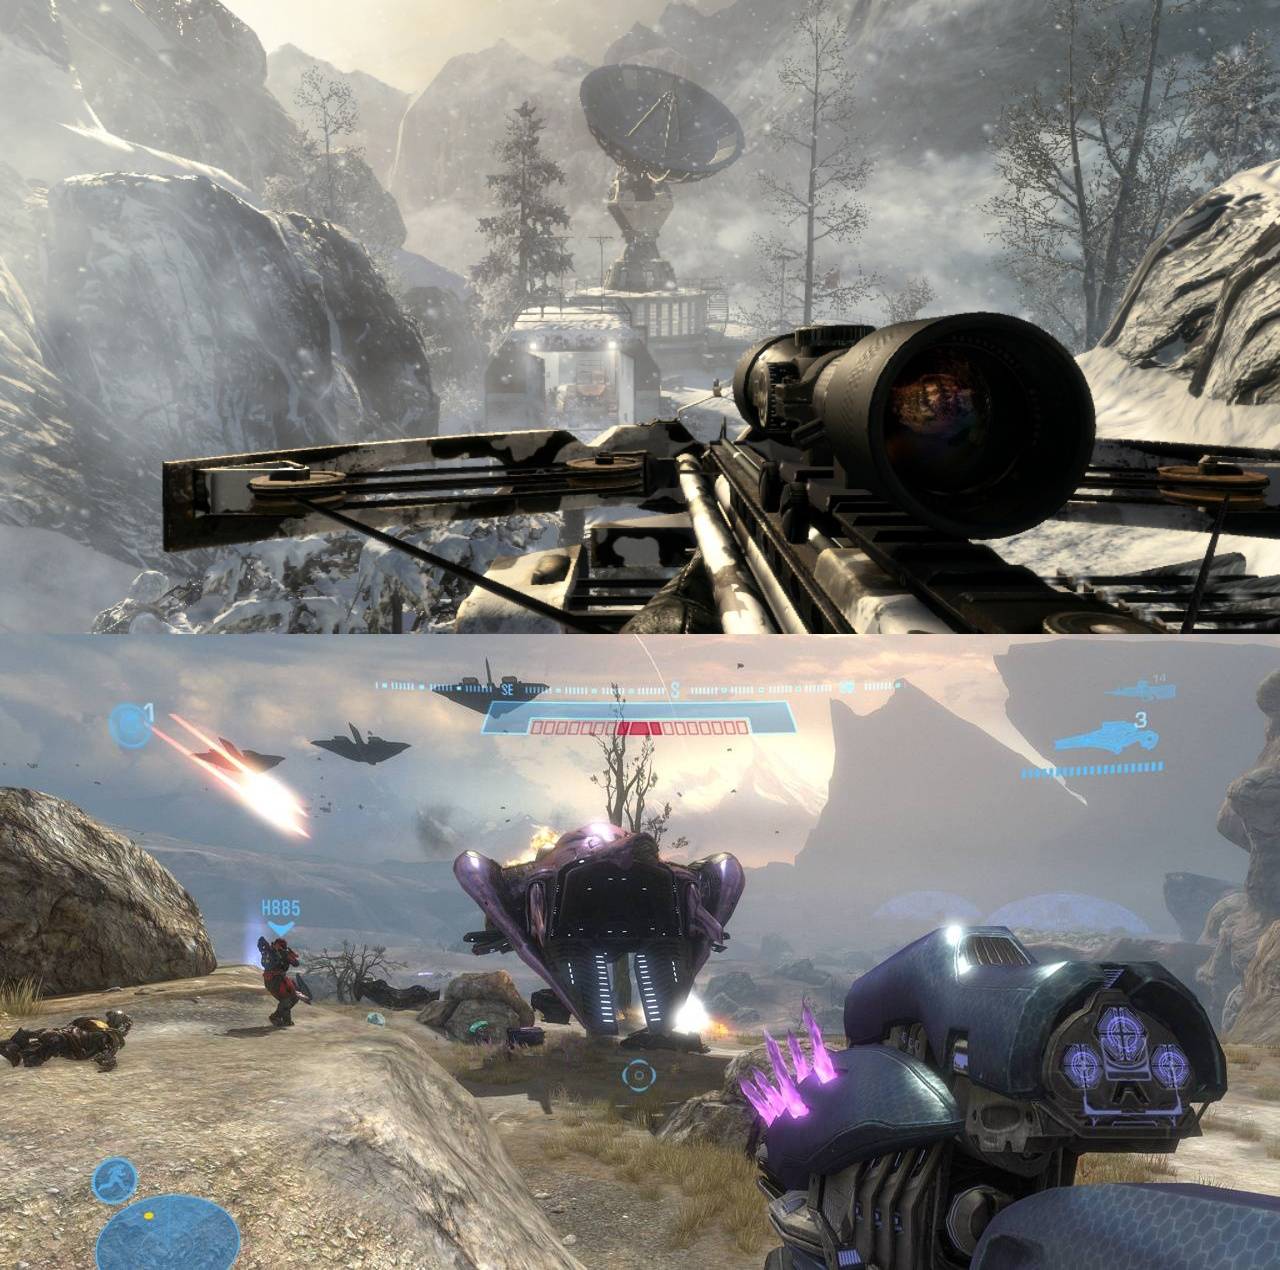 Halo Reach versus Call of Duty Black Ops: HD Screen shot comparison | Page 3